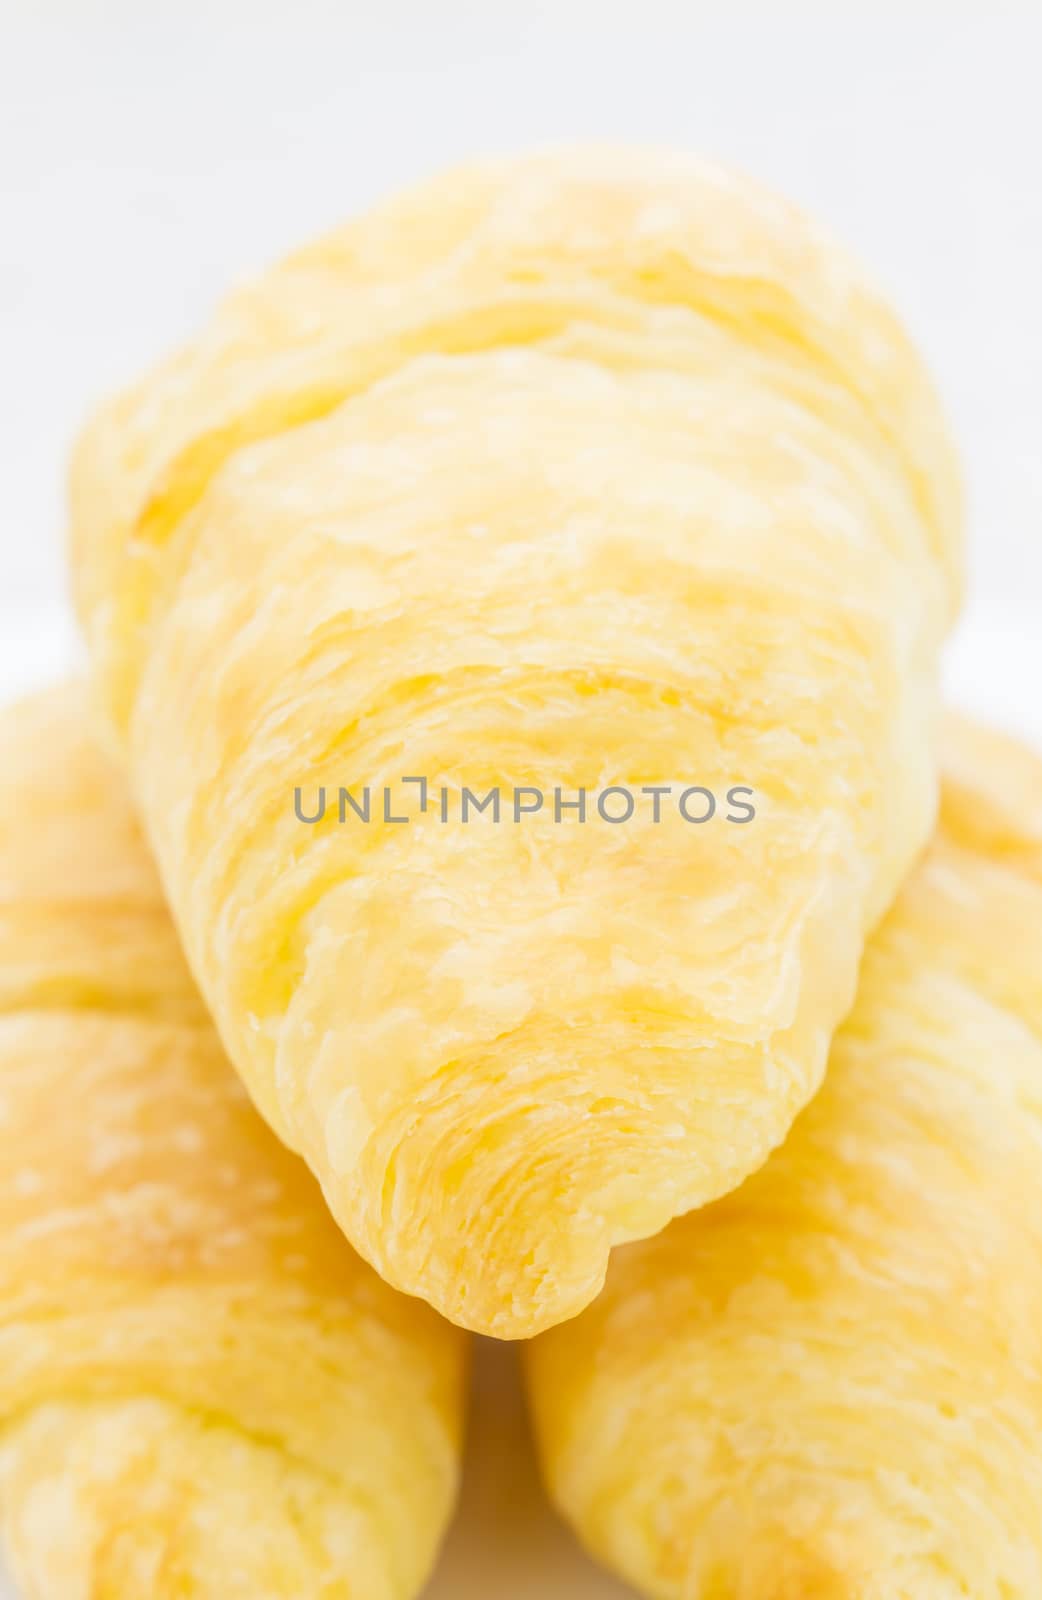 Croissant or Bread on Close Up View by steafpong